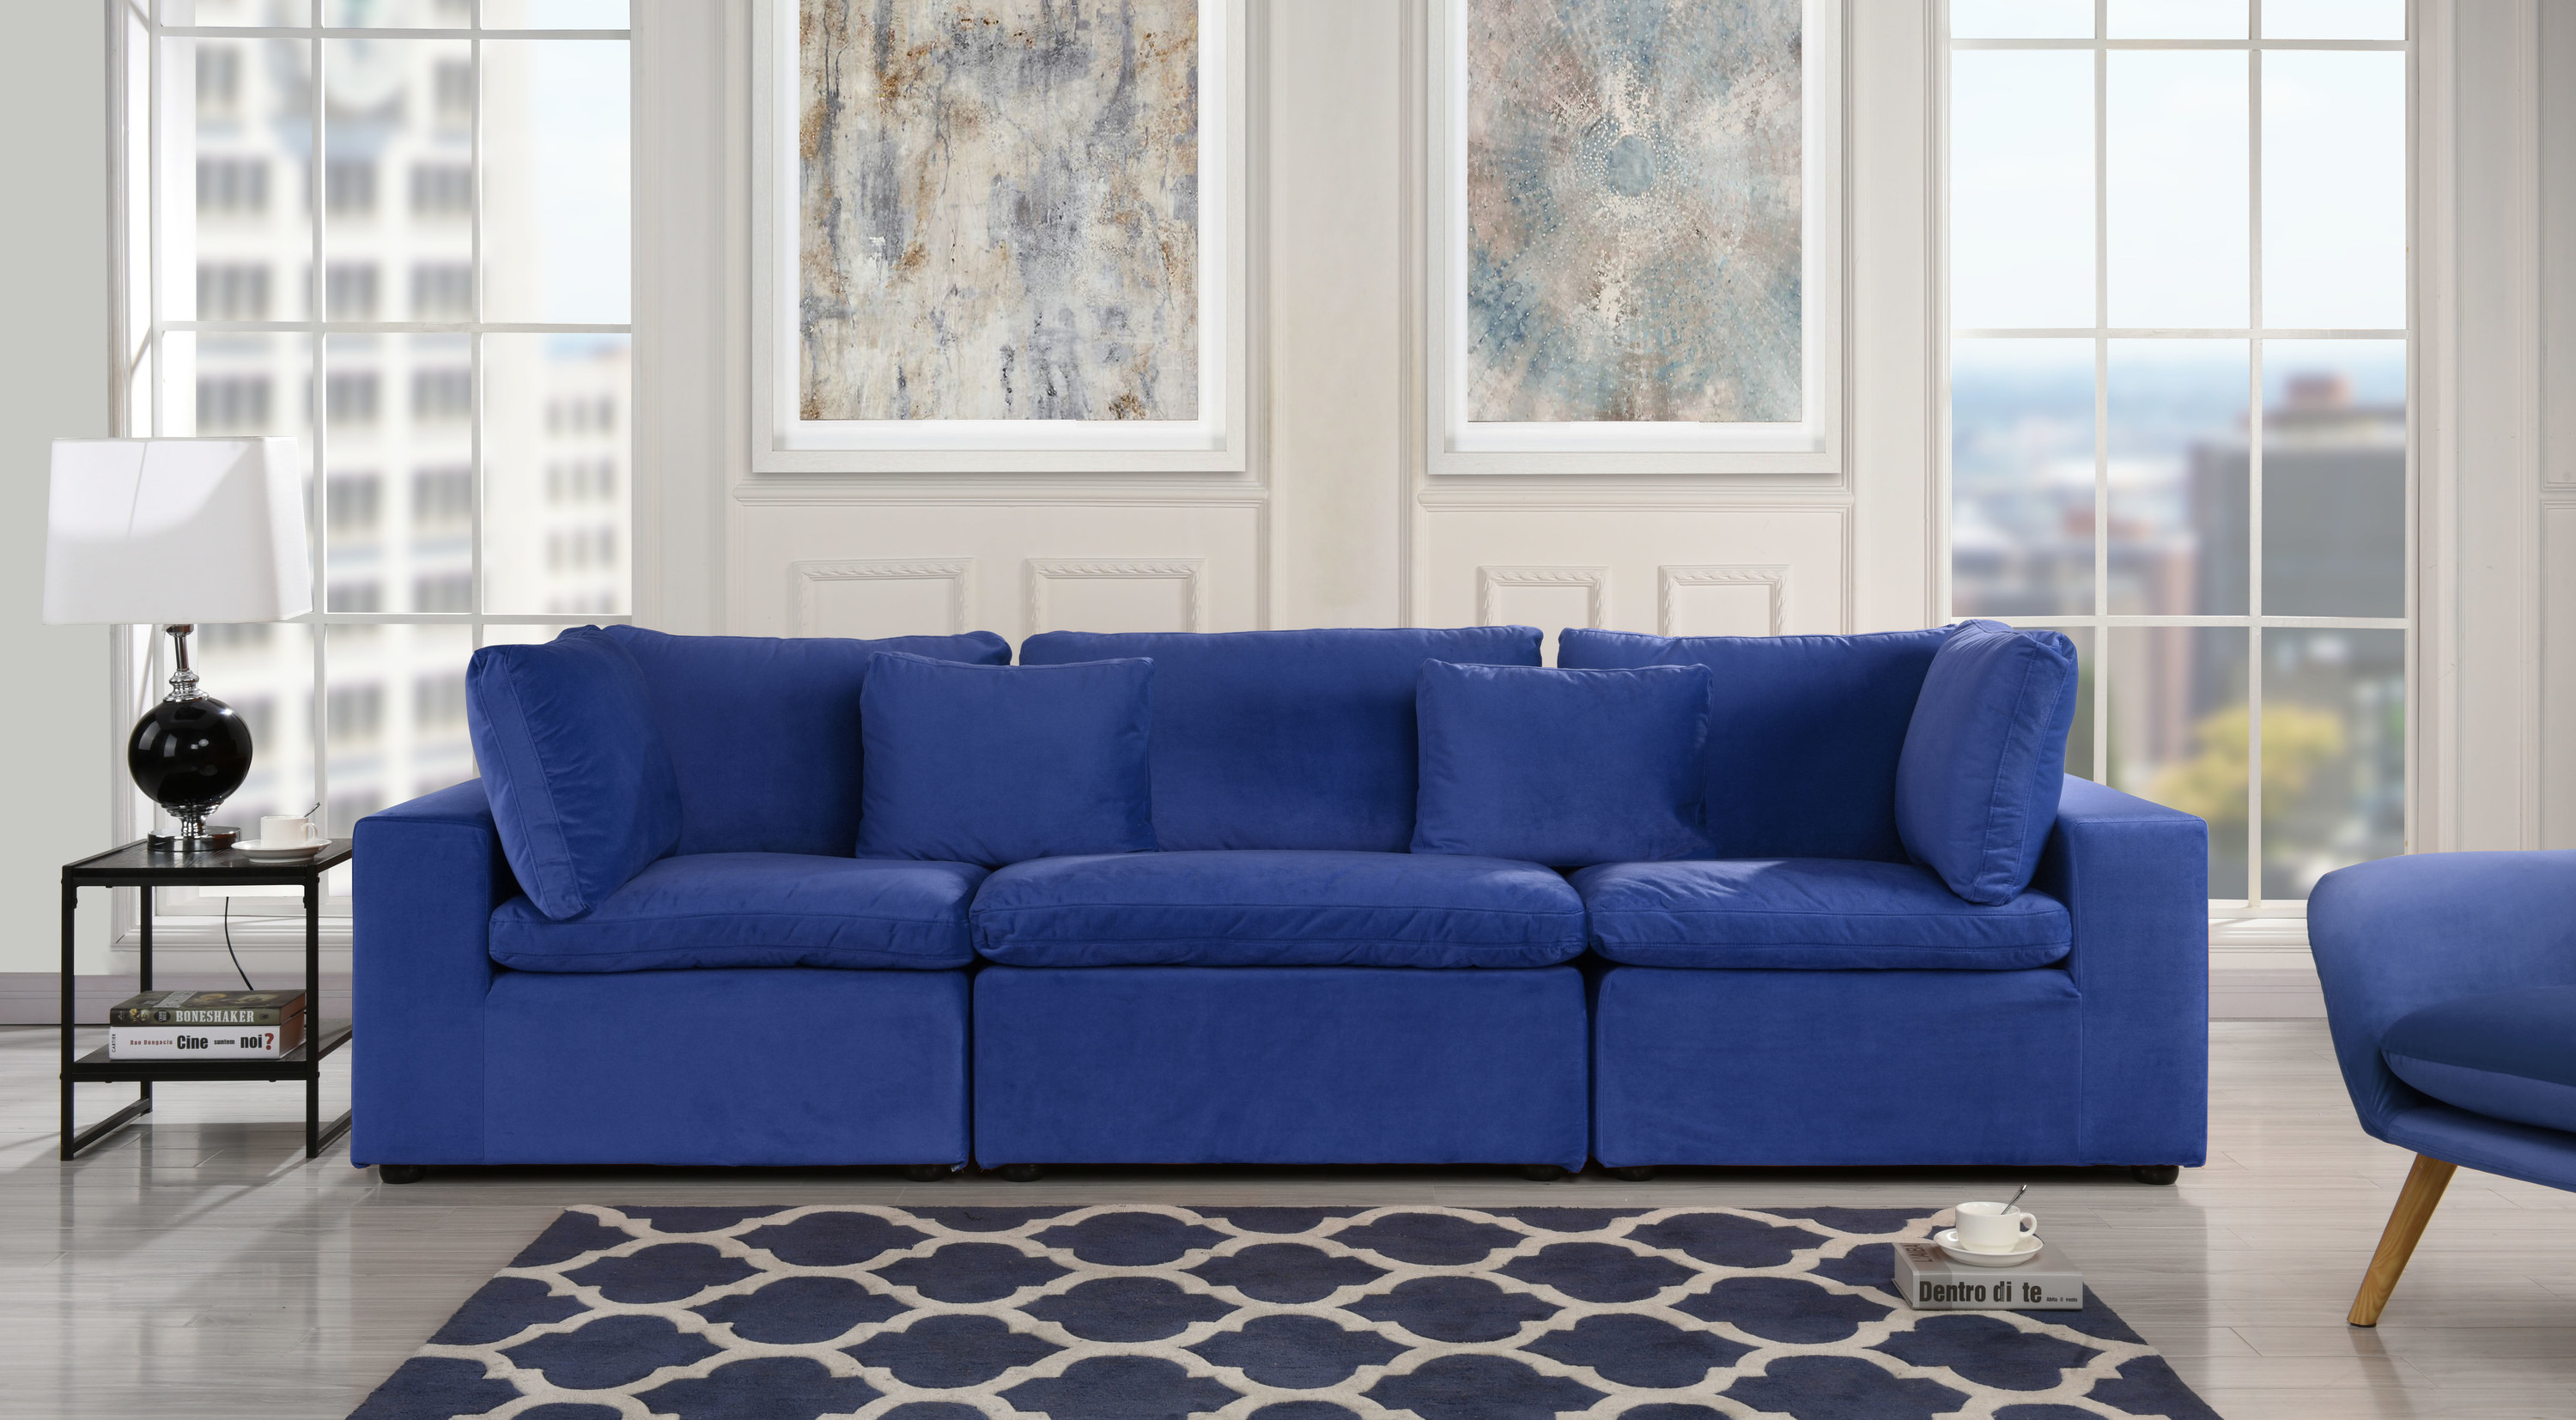 Blue couch in living room